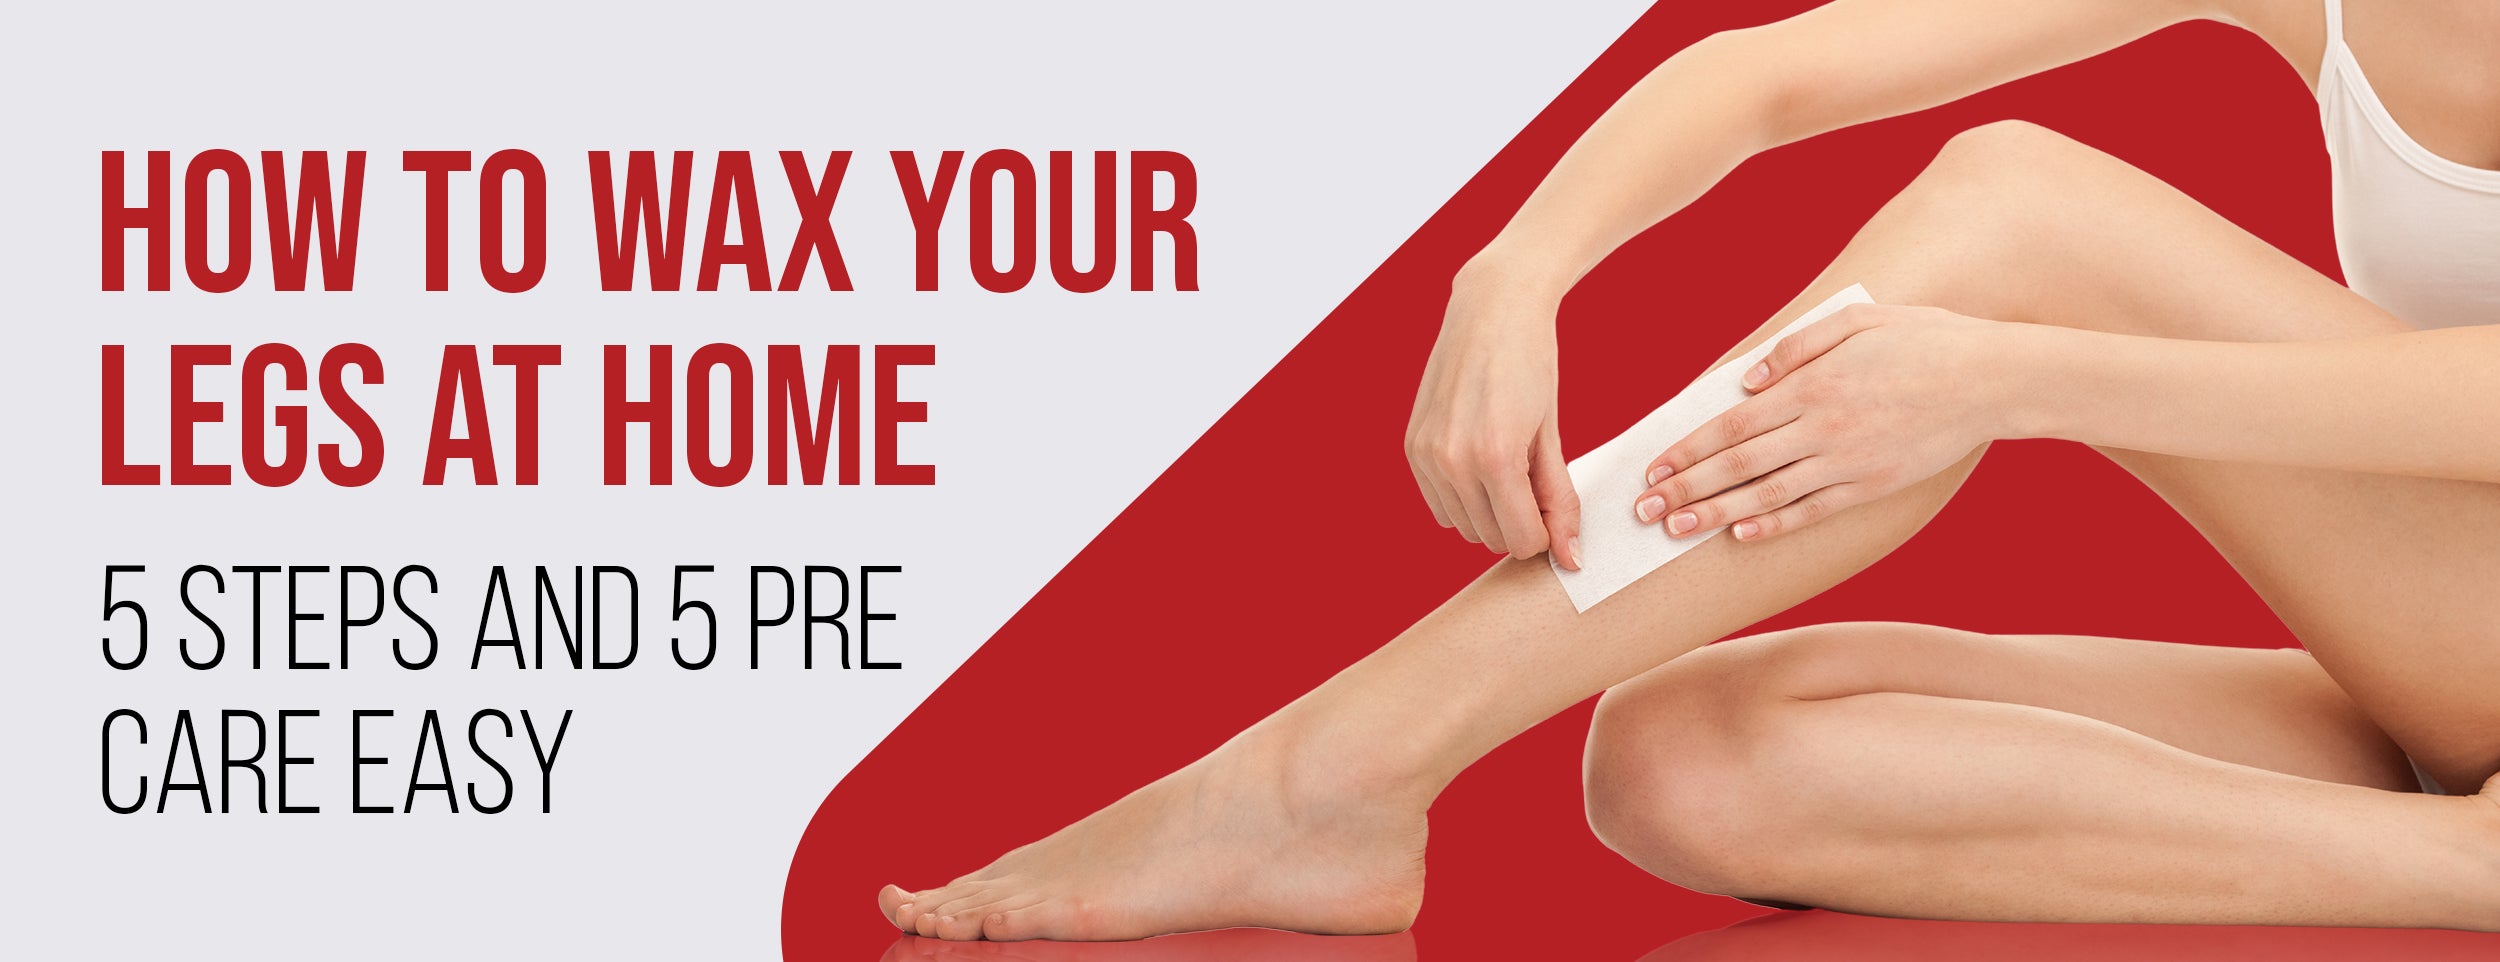 5 Easy Steps to Wax Your Legs at Home & 5 Pre-Care Steps